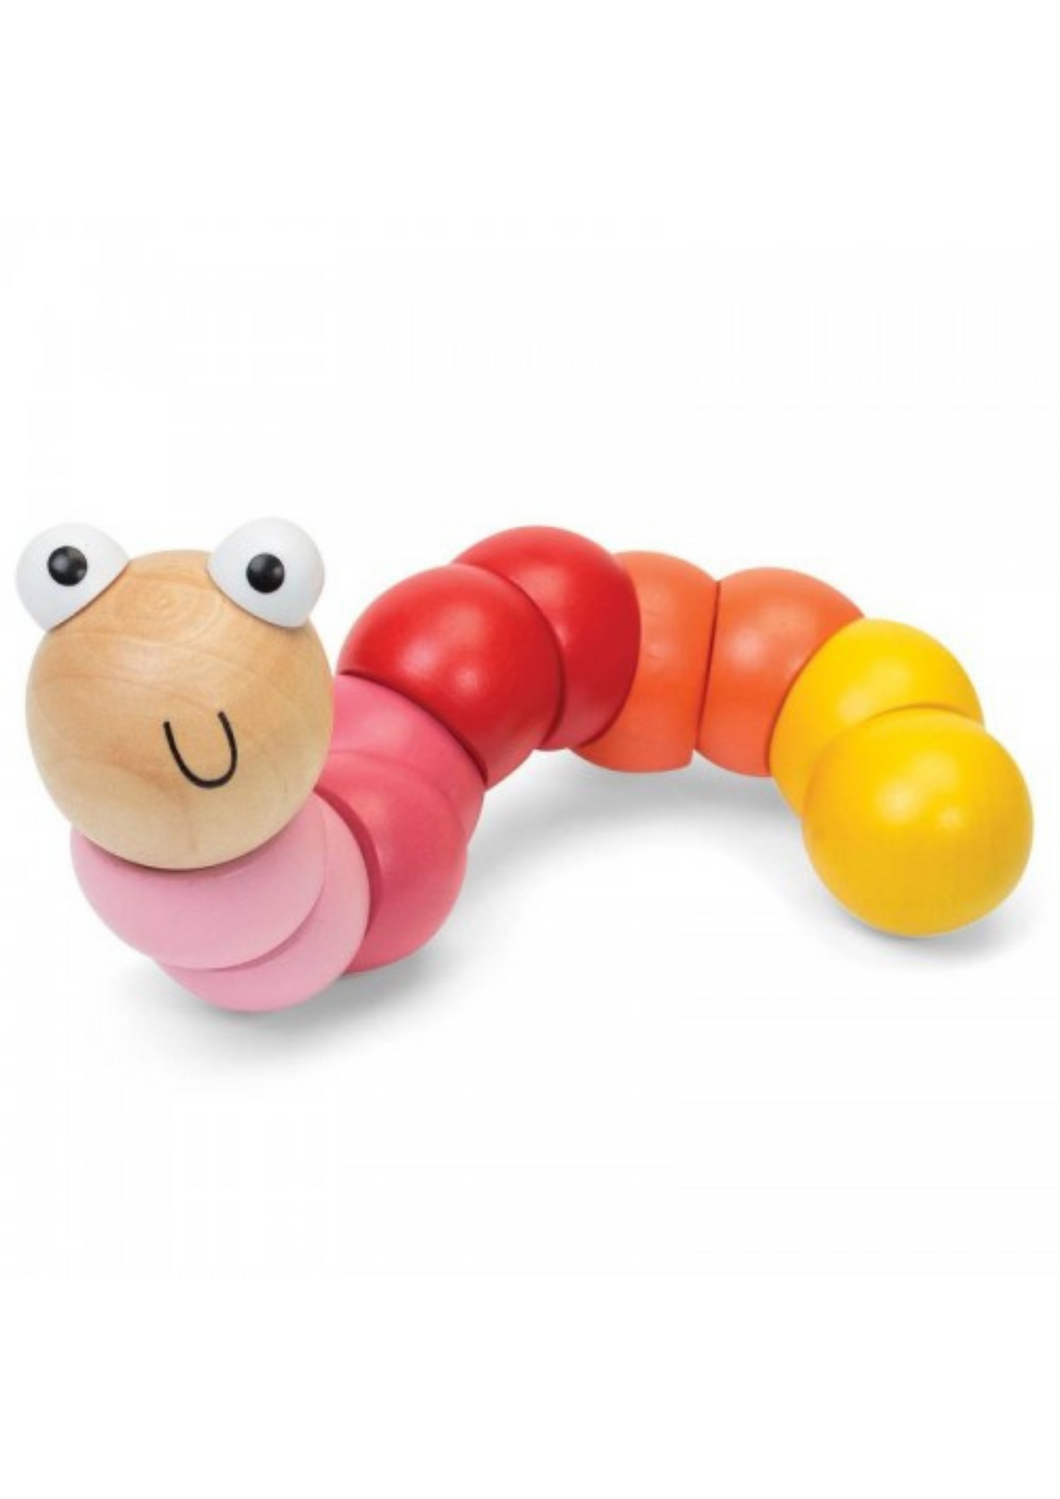 Wooden jointed worm - PINK